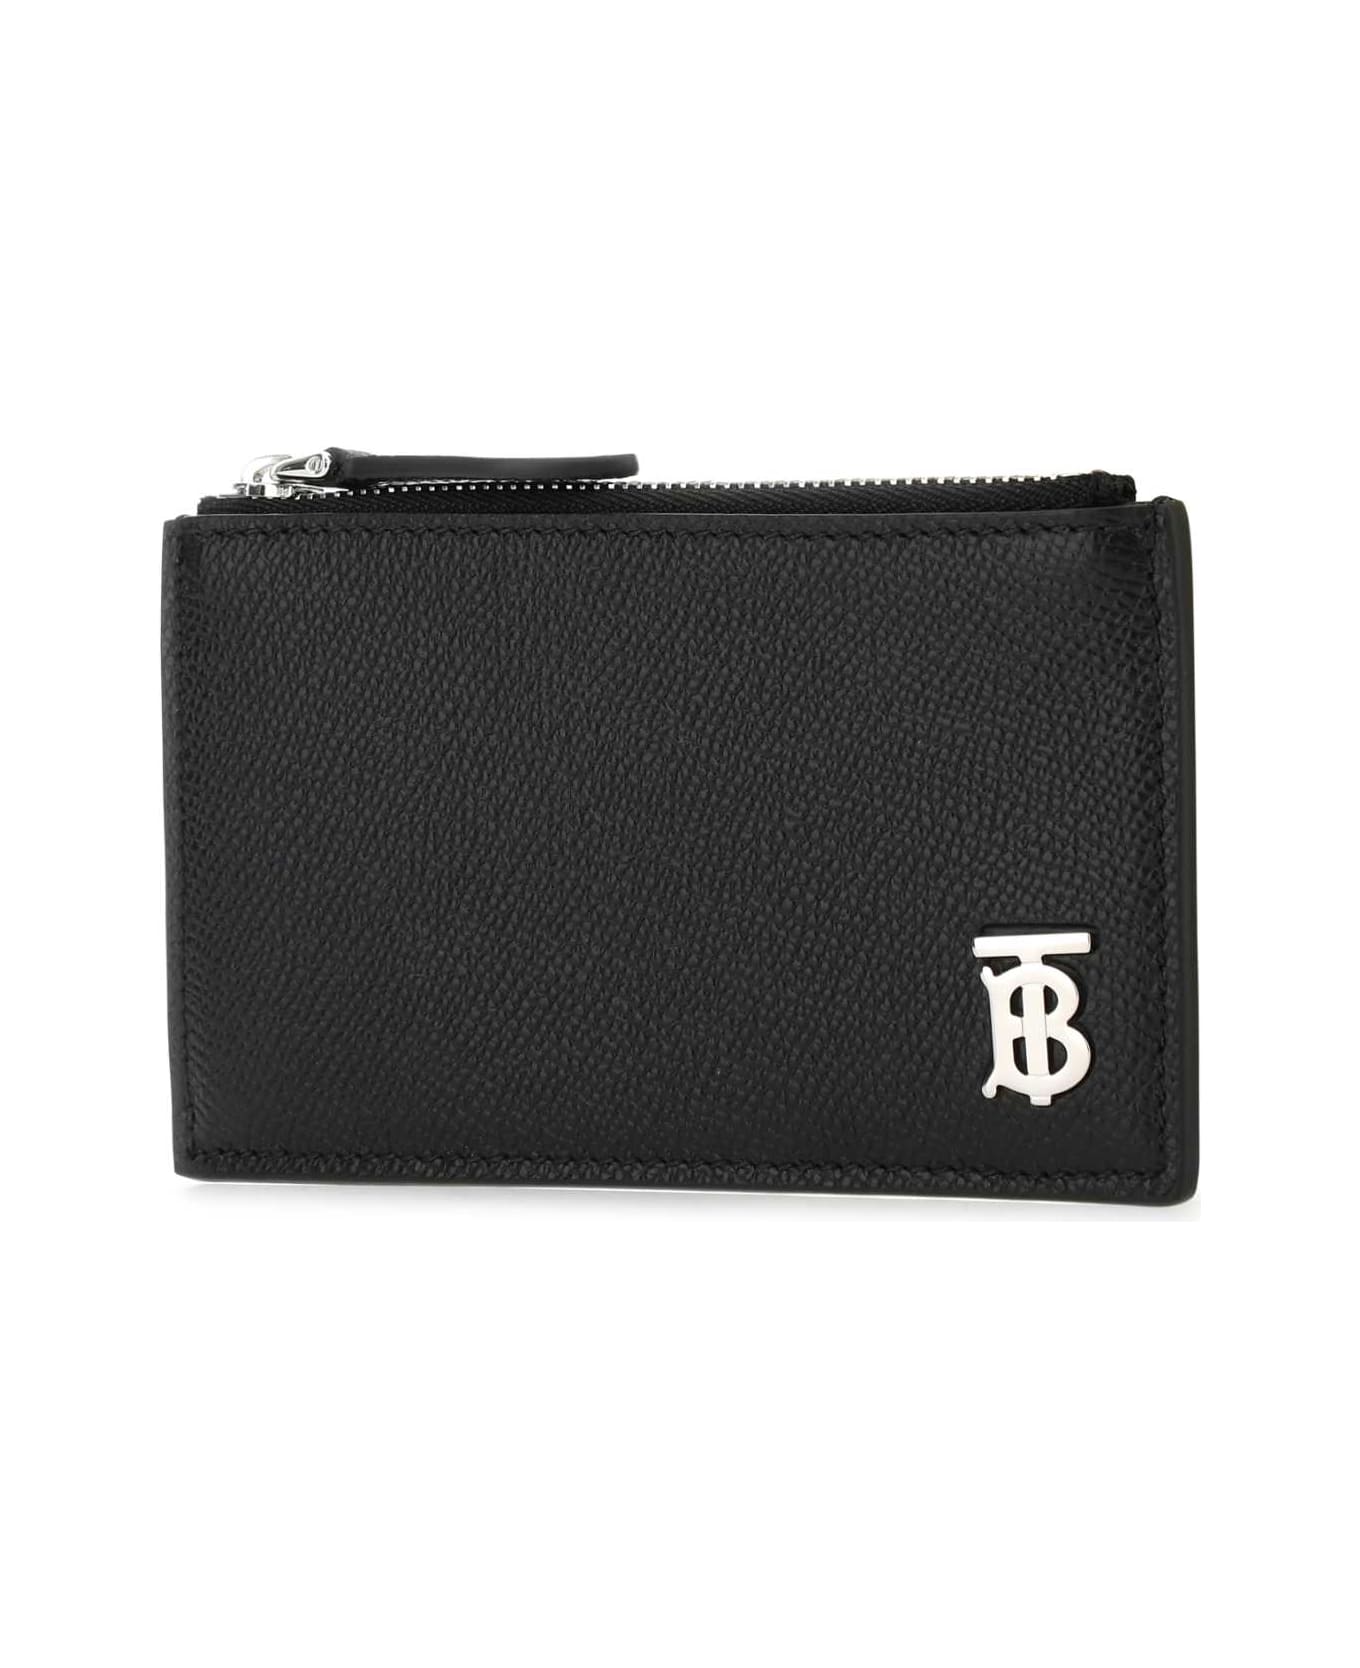 Burberry Black Leather Card Holder - A1189